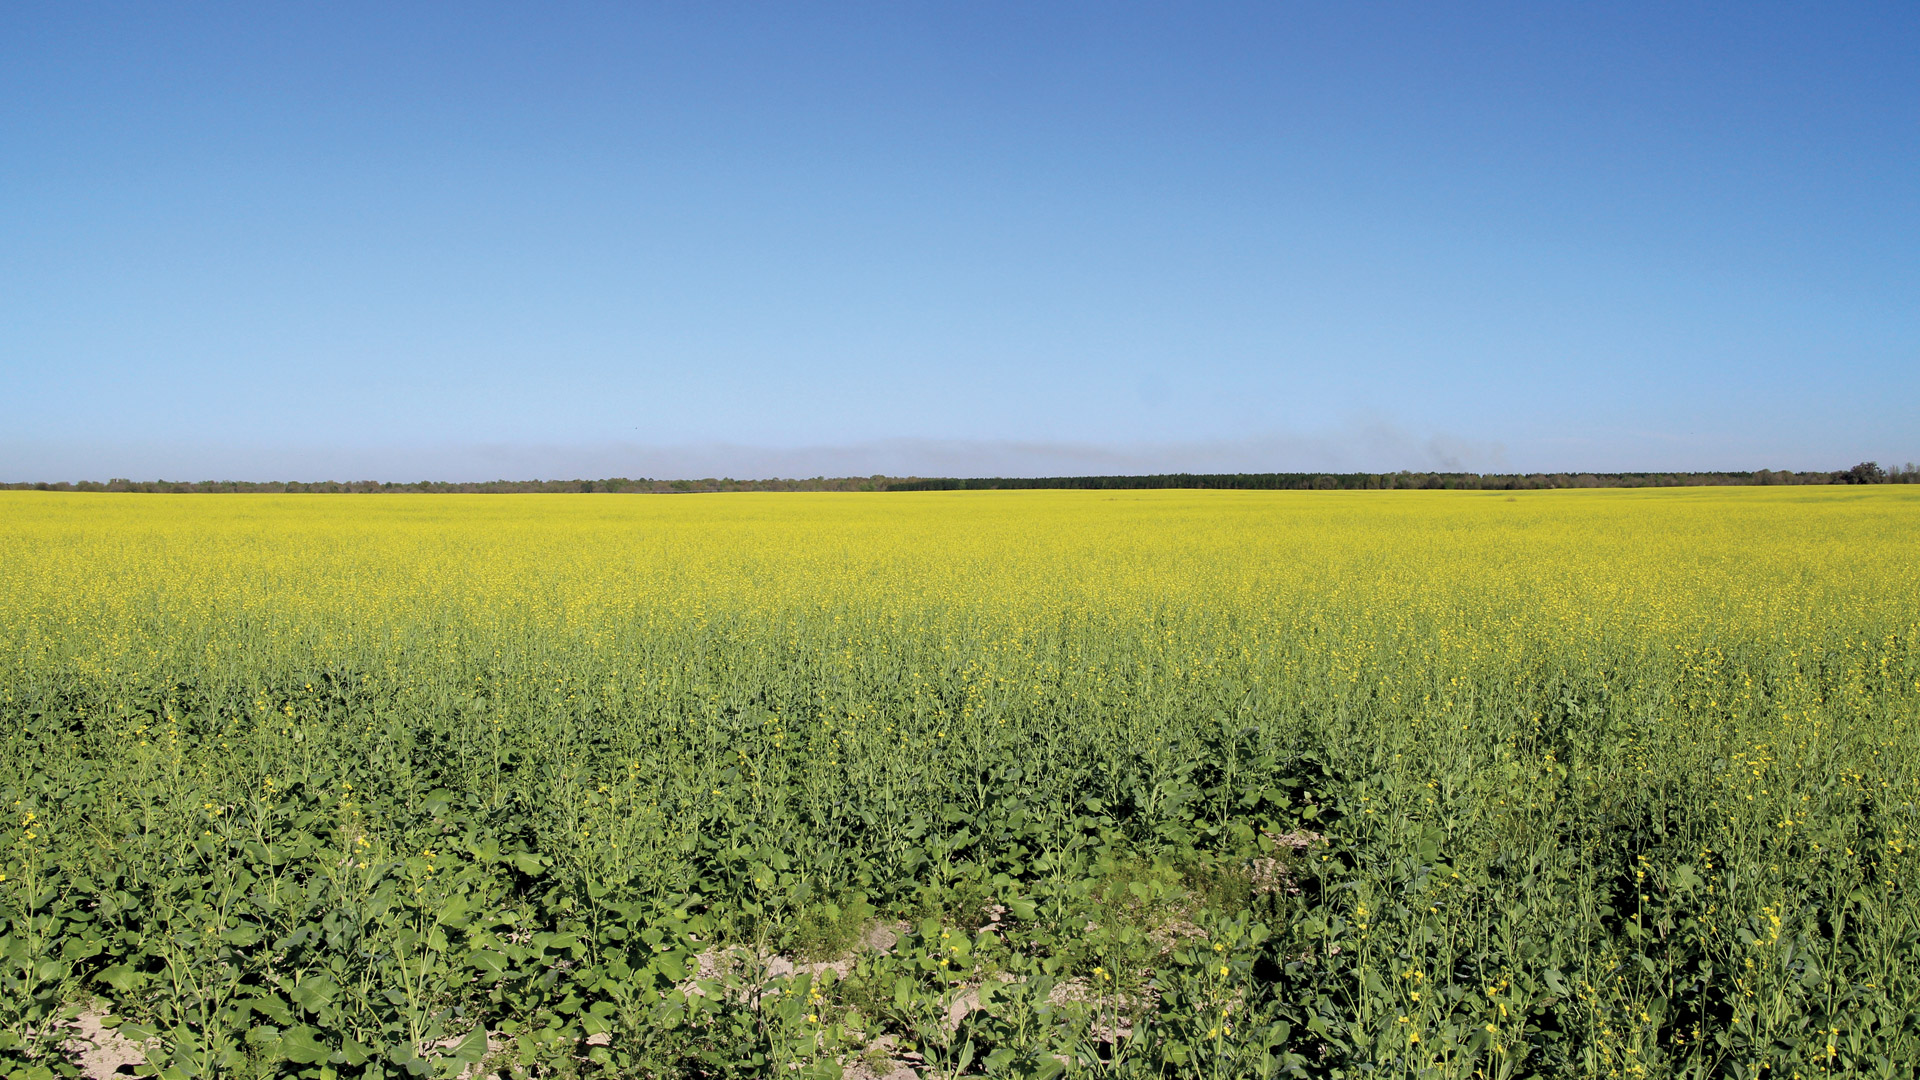 Feature image for Flower Power depicting a field of carinata flowers